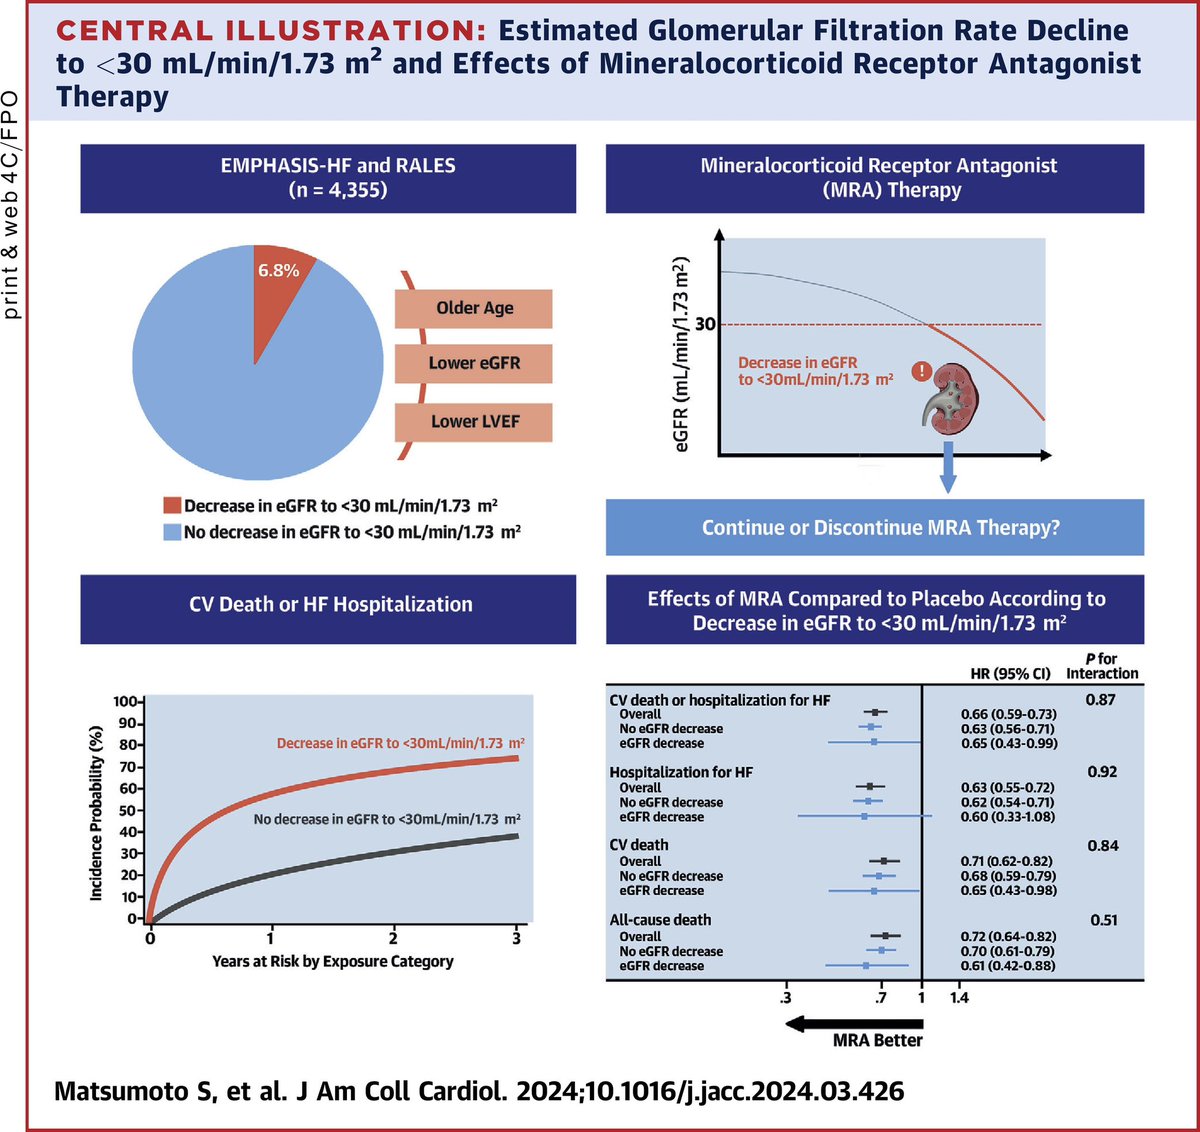 Mineralocorticoid Receptor Antagonists in #HF and Impaired Renal Function 👥4355 ➡️6.8% experienced a ↘️ of eGFR after randomization to <30 mL/min/1.73 m2 👉risk reduction in the primary outcome with MRA therapy was similar in those who experienced a decrease in eGFR to <30